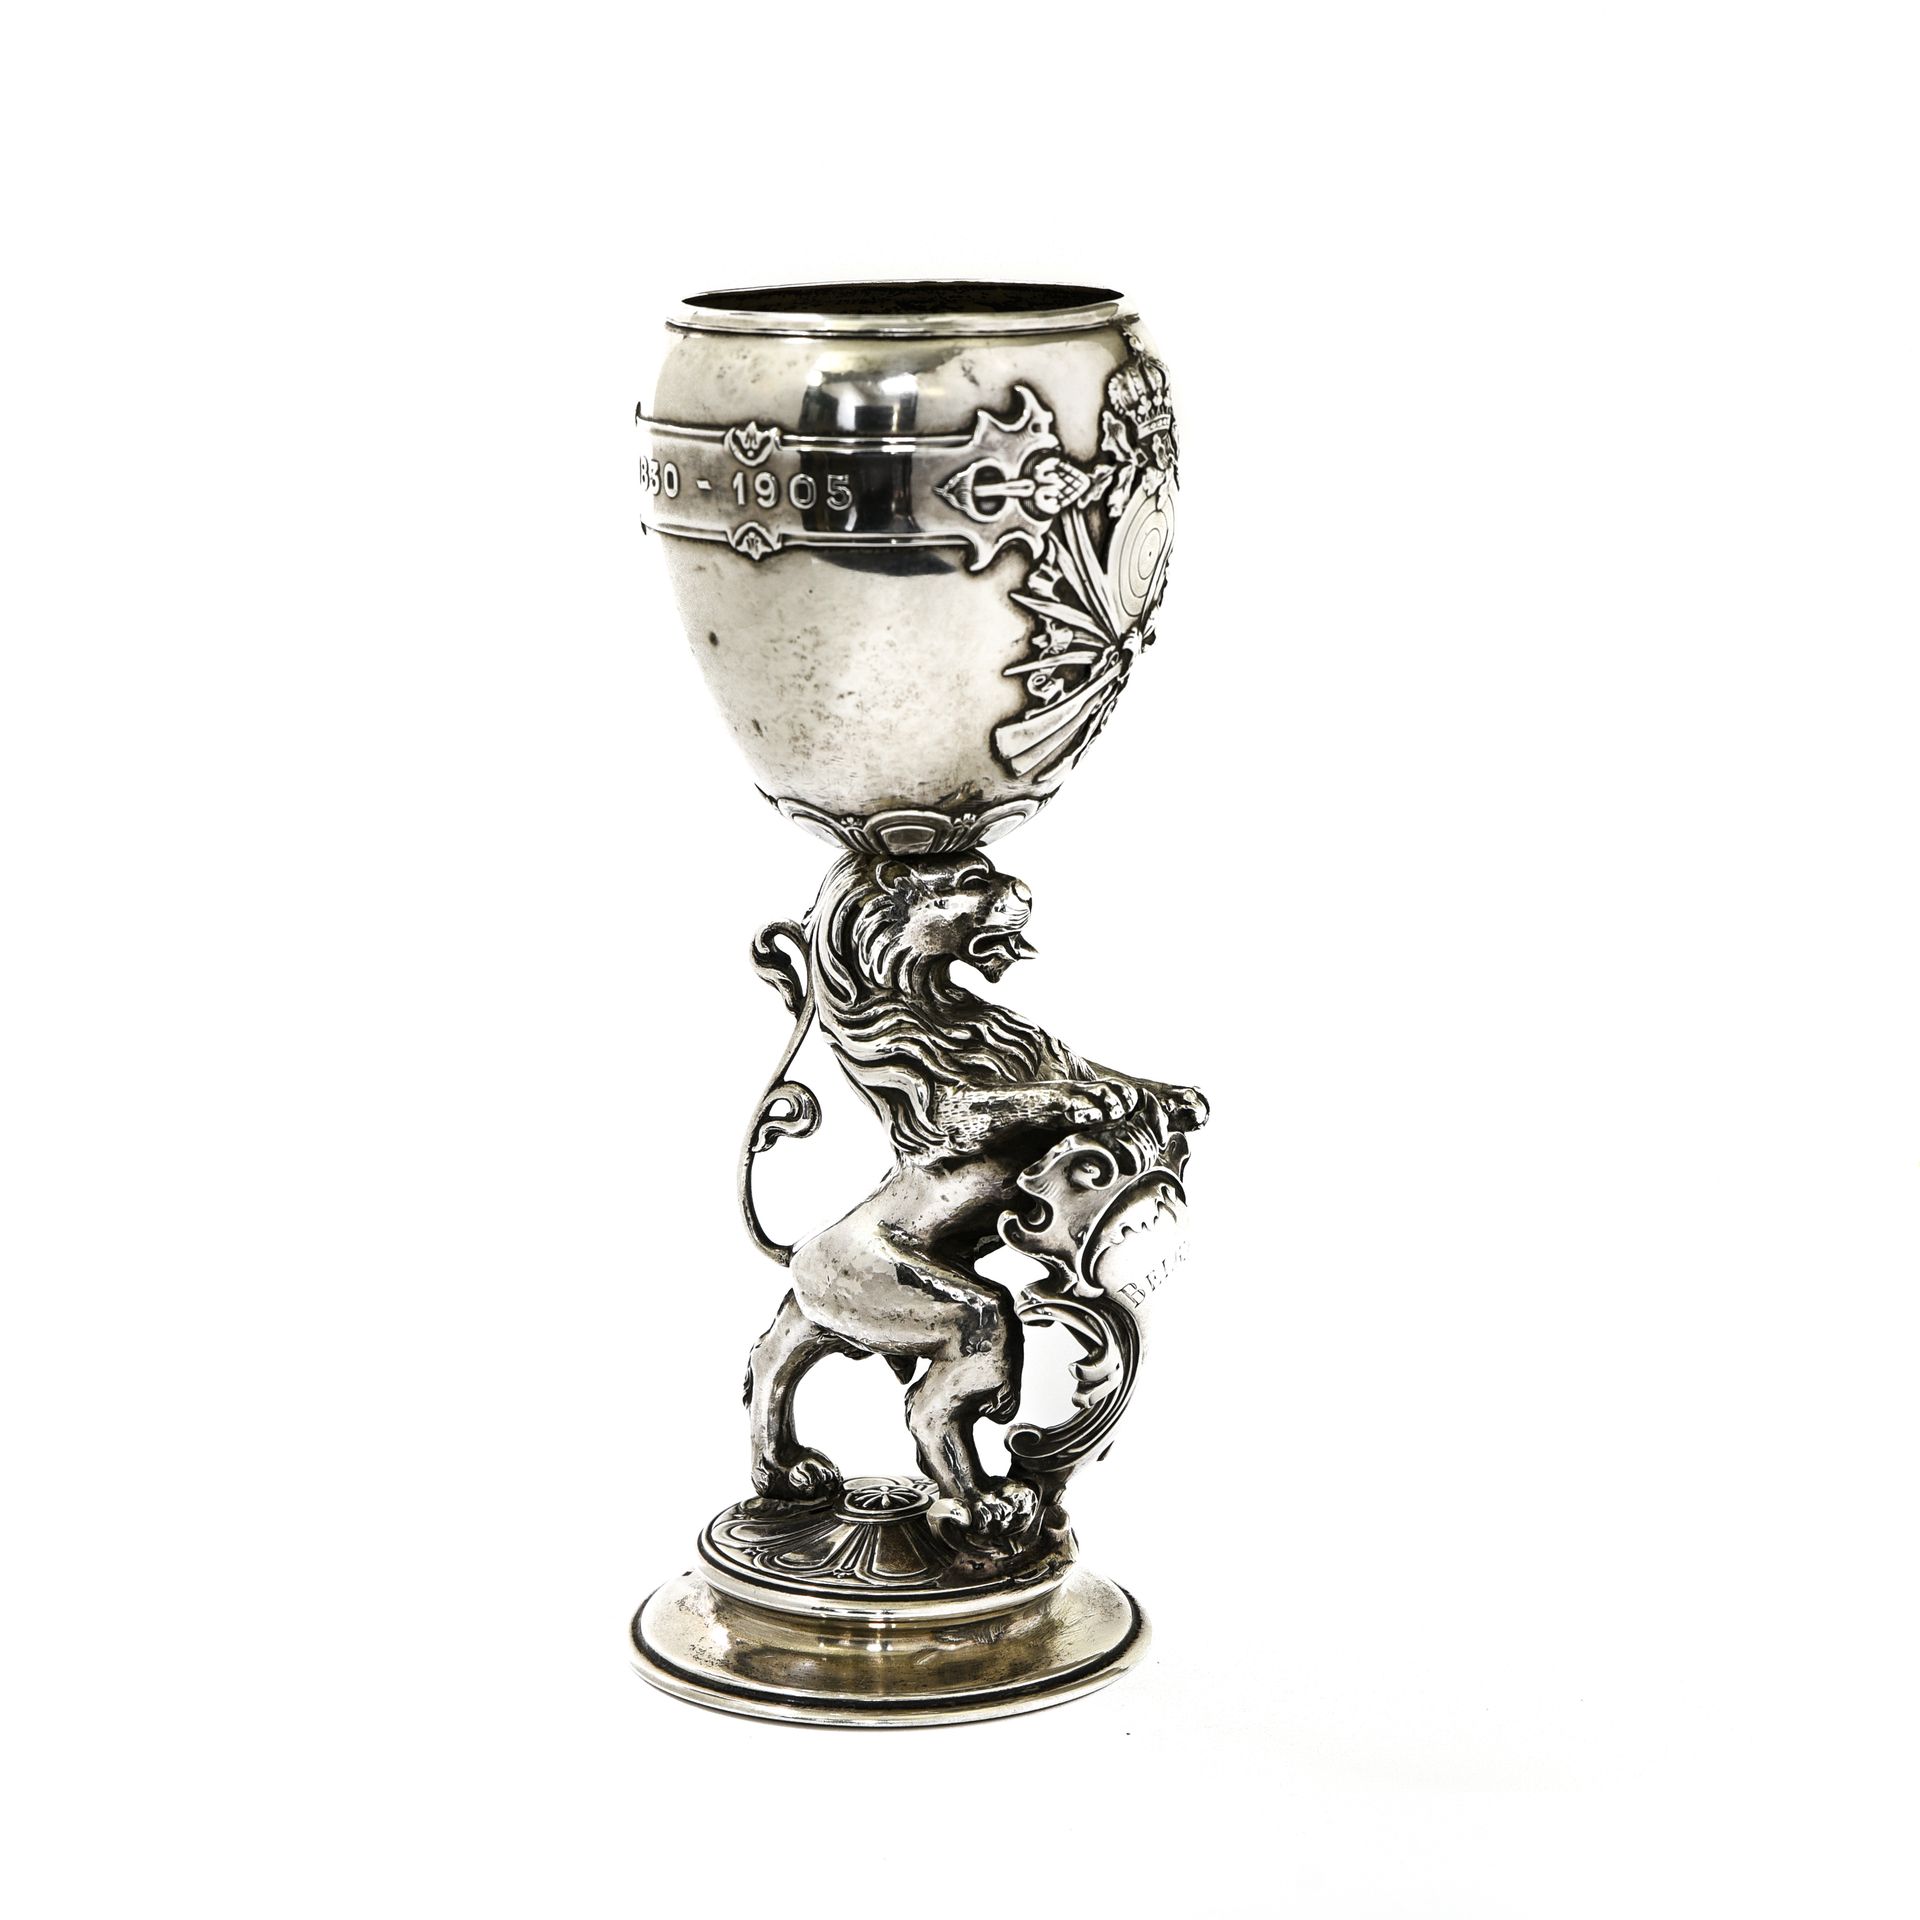 WOLFERS Frères WOLFERS FRERES

Shooting prize cup from the 75th anniversary of B&hellip;